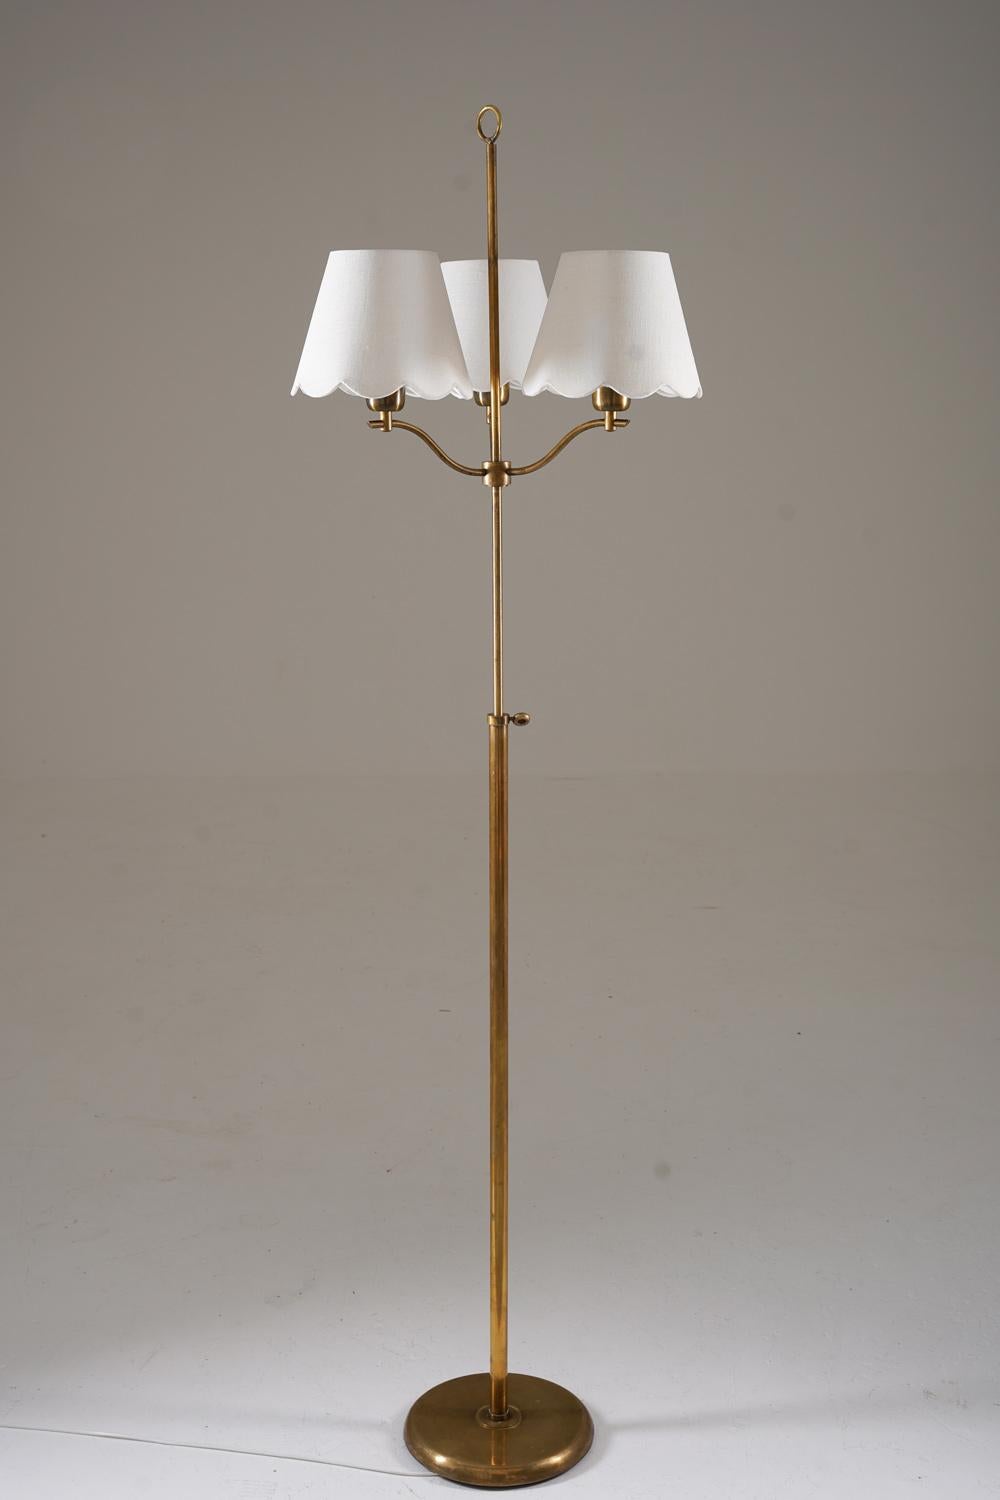 This is a lovely Swedish Modern floor lamp that was manufactured in Sweden during the 1940s. The lamp features a brass base and rod, supporting a slimmer rod that is adjustable in height (60